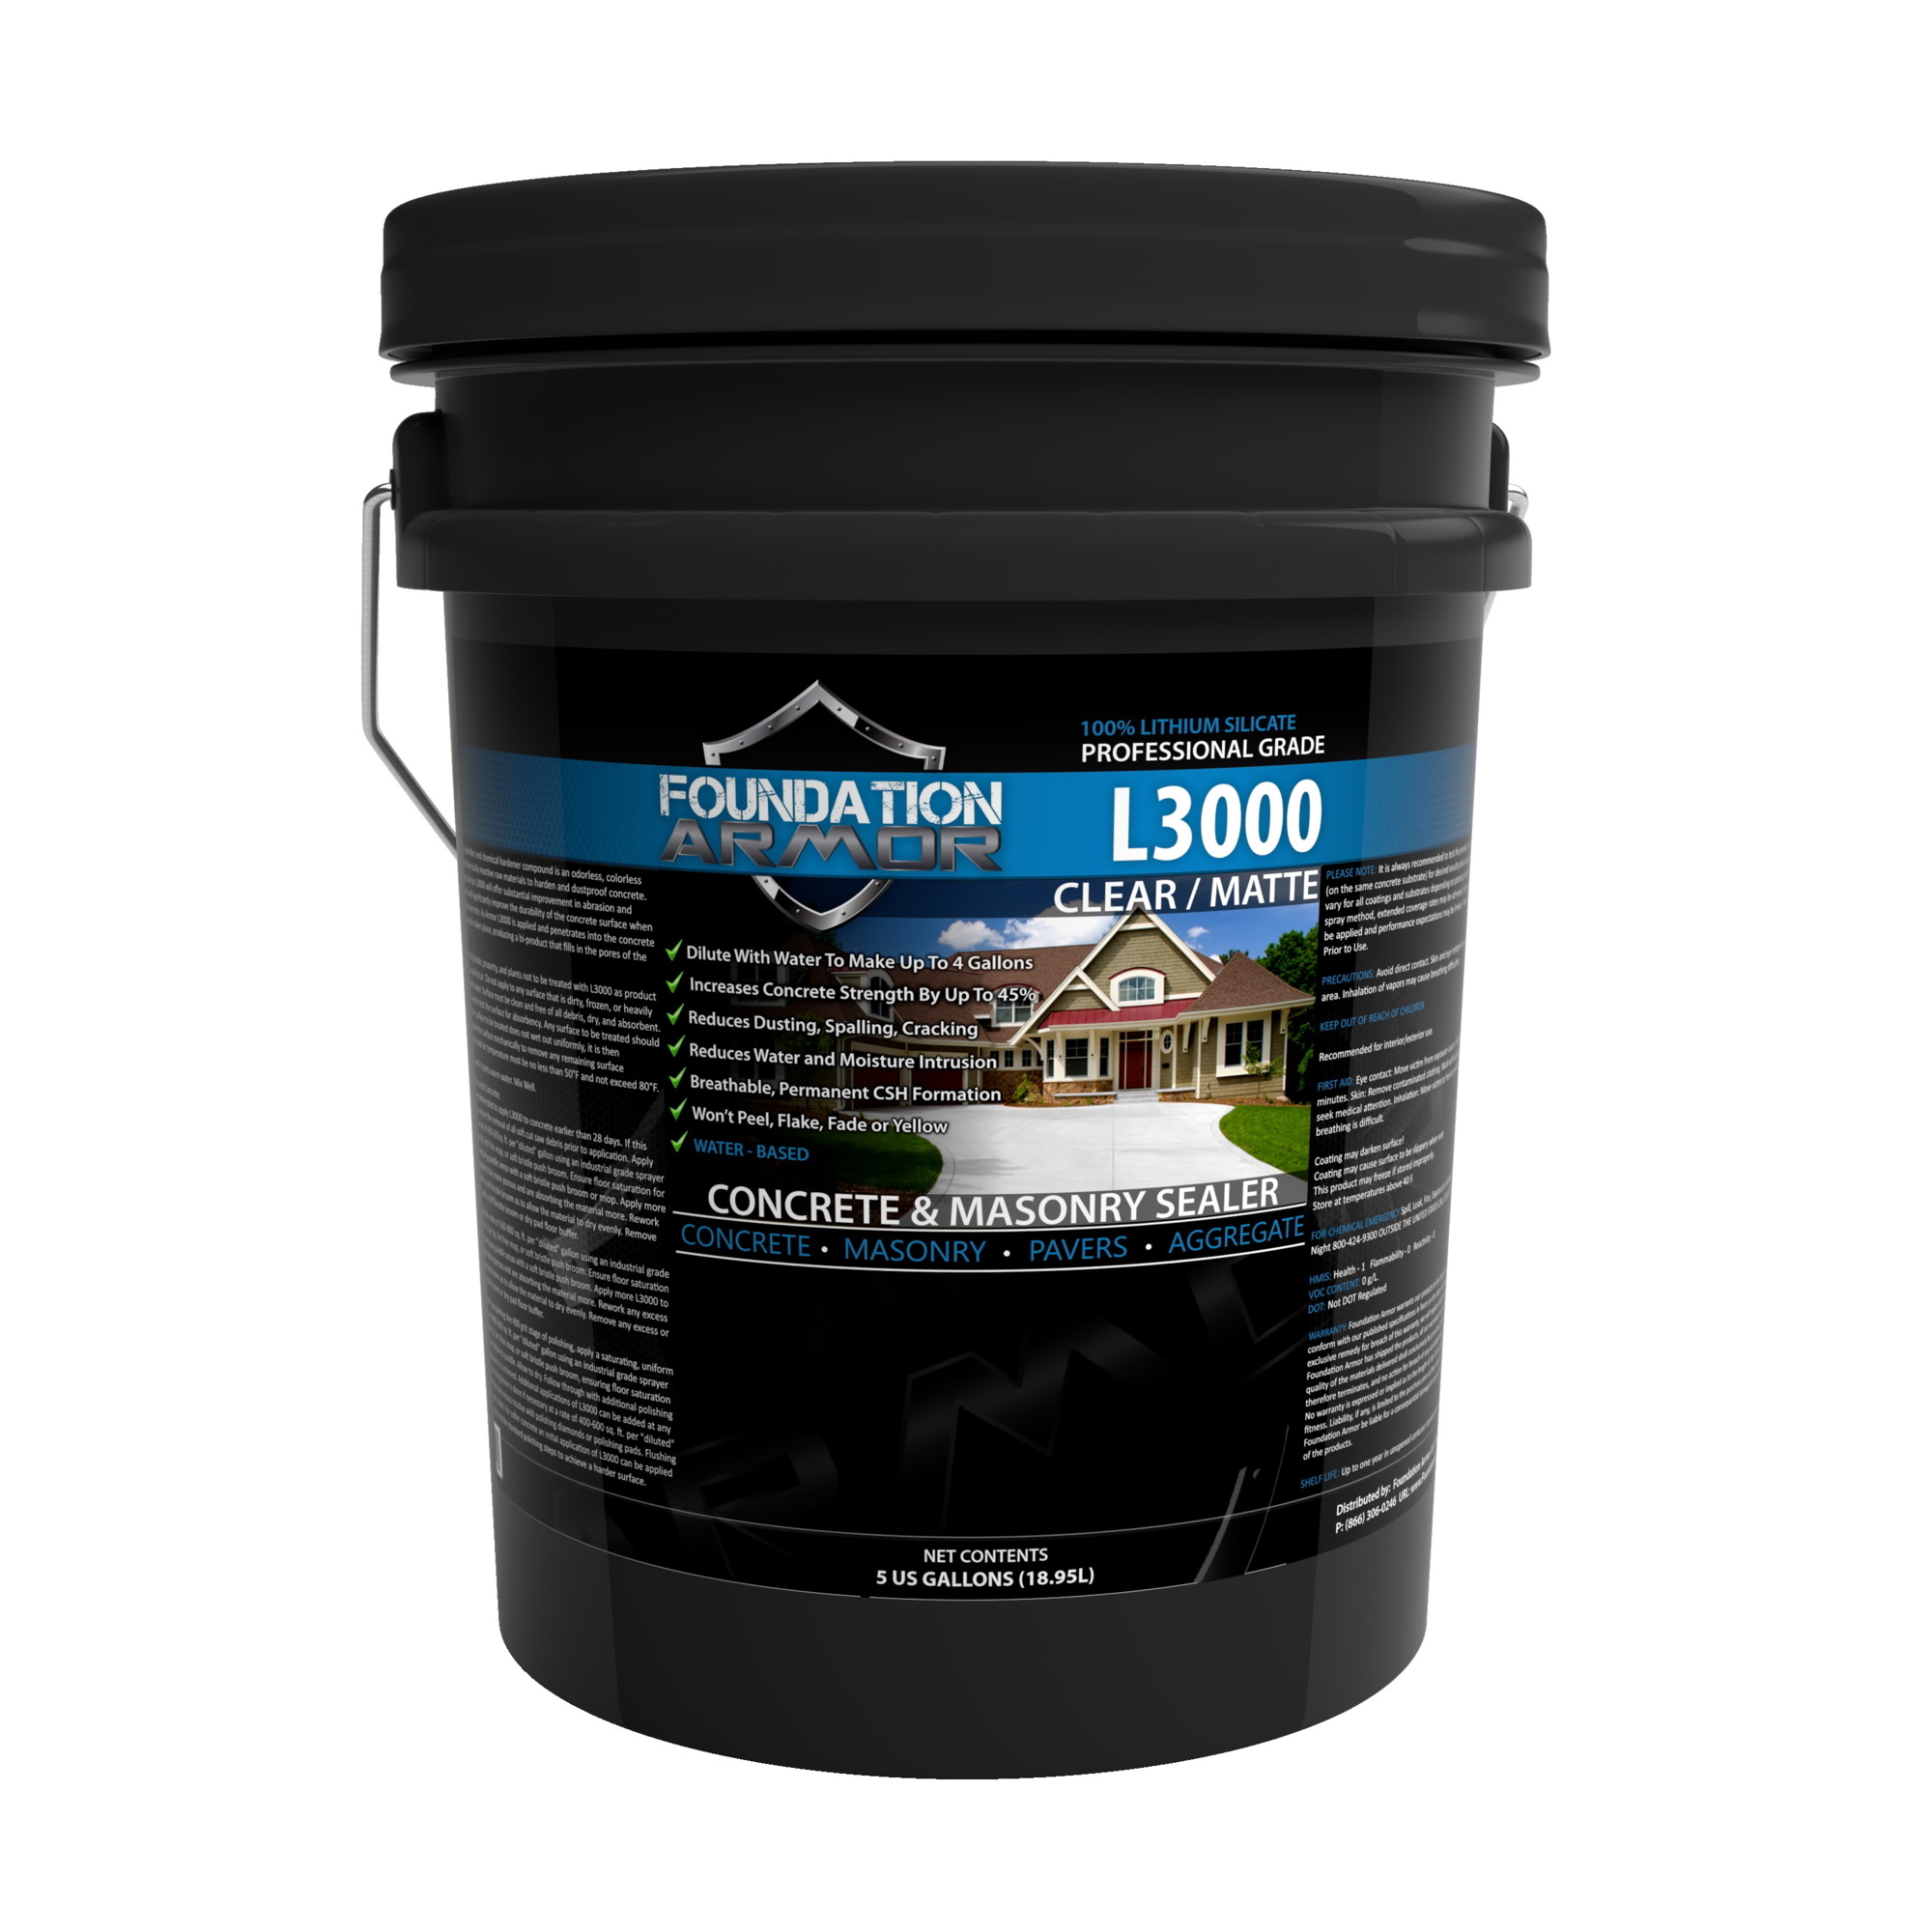 Foundation Armor, Lithium Silicate Concrete Densifier and Hardener, Container Size 5 Gallon, Color Clear, Application Method Sprayer, Model L30005GAL